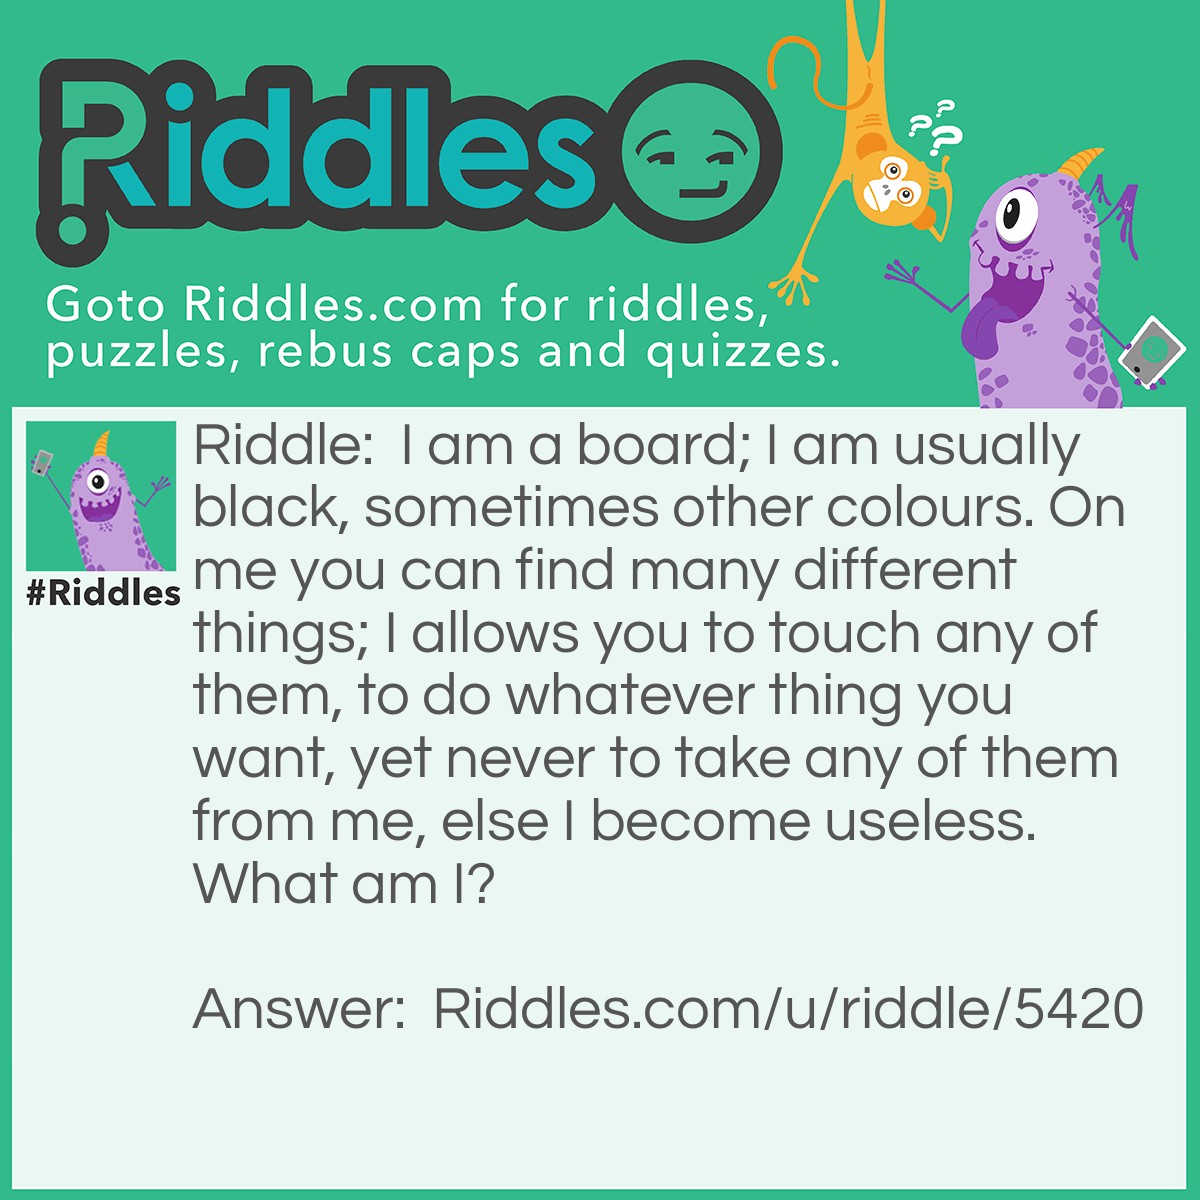 Riddle: I am a board; I am usually black, sometimes other colours. On me you can find many different things; I allows you to touch any of them, to do whatever thing you want, yet never to take any of them from me, else I become useless. What am I? Answer: A KEYboard.